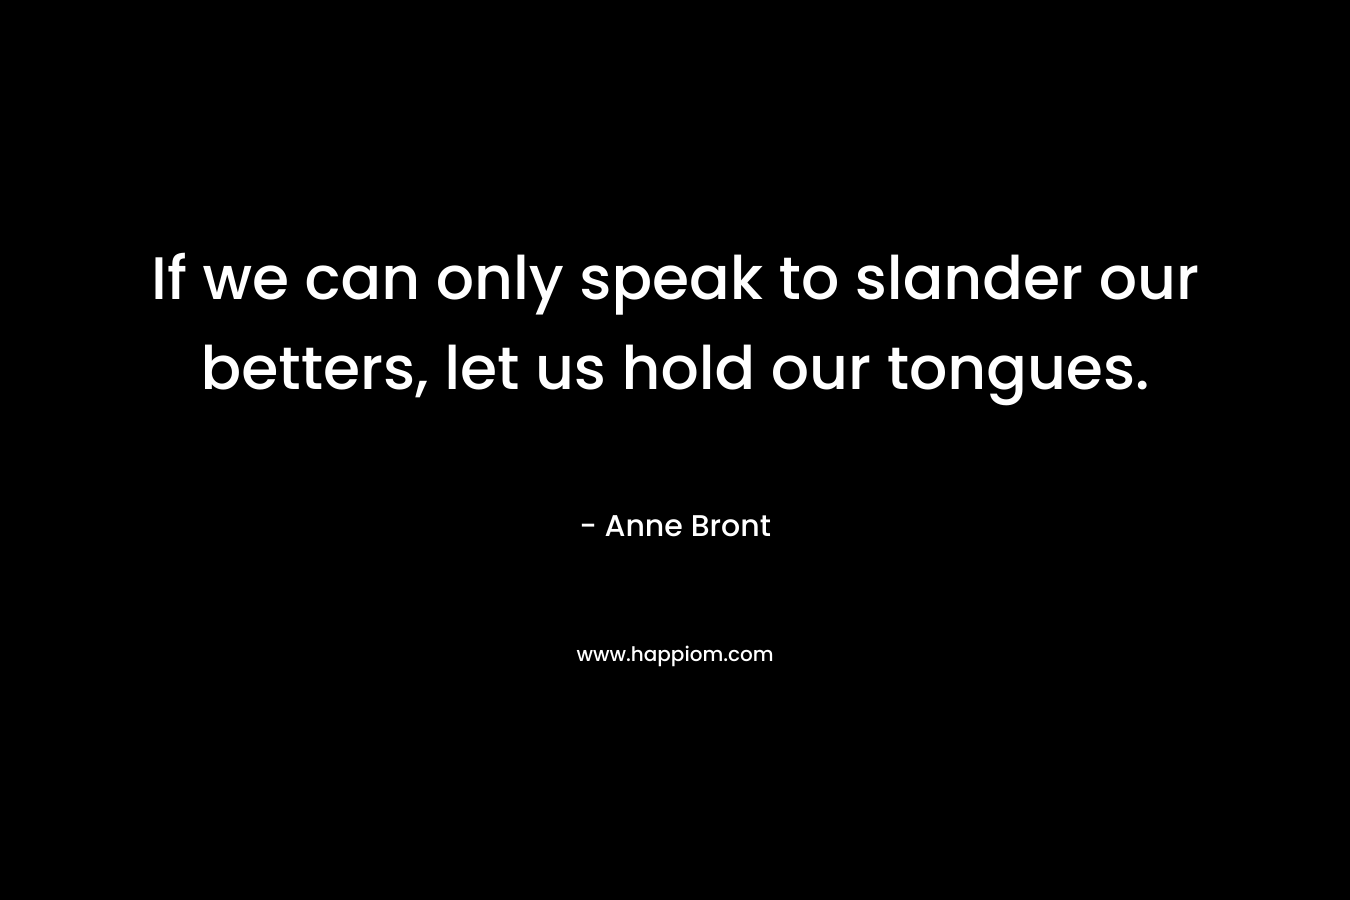 If we can only speak to slander our betters, let us hold our tongues.